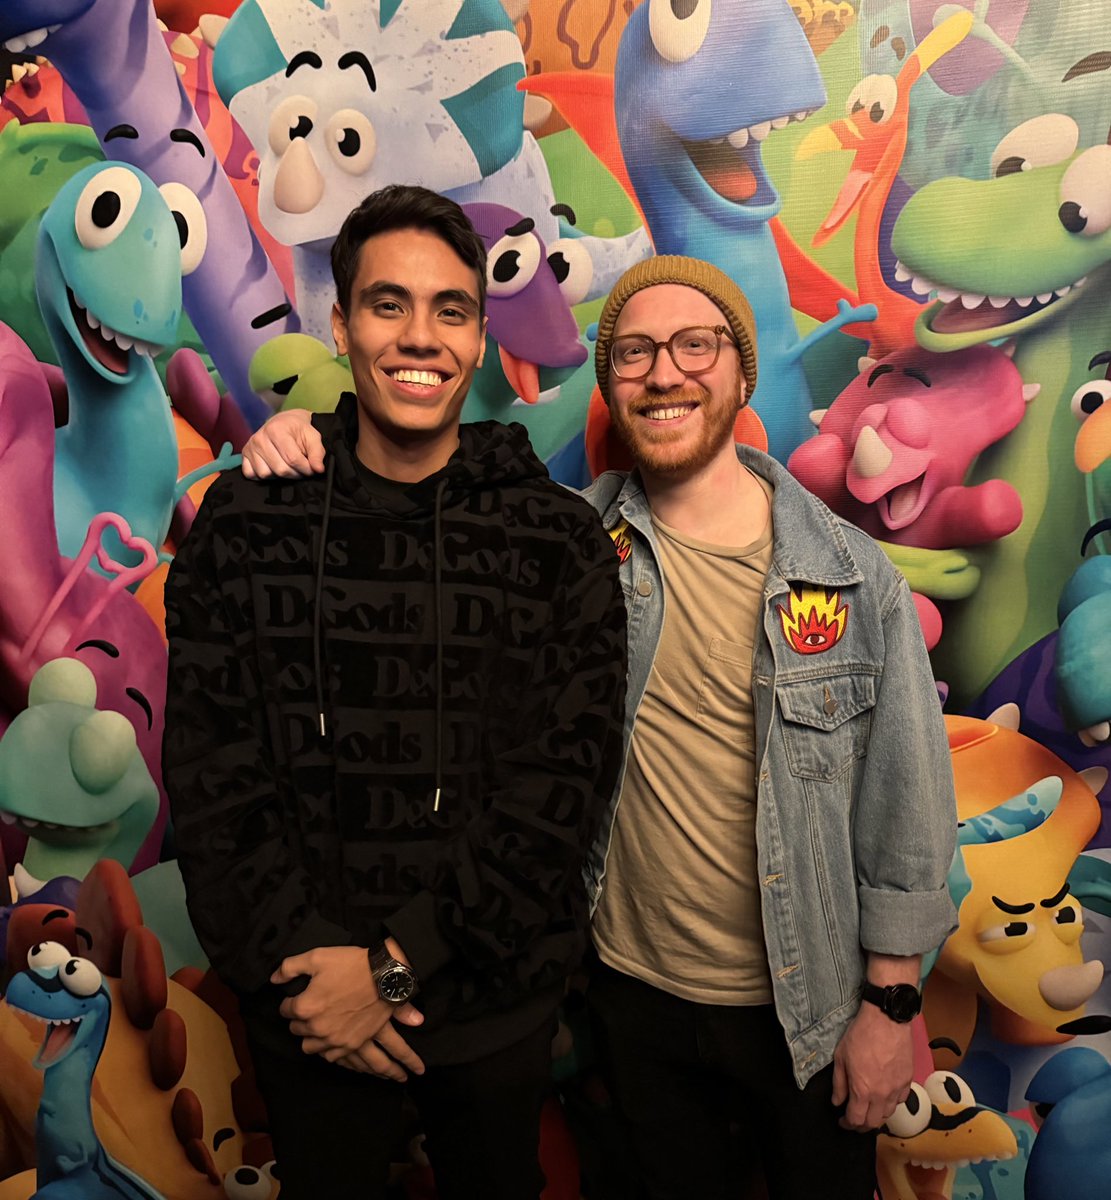 IRL events will always be the alpha! 🗽 Started working for @Claynosaurz almost a year ago & finally had the pleasure of meeting @Cabanimation 🦖 My experience working along side this team has been like none other & you better be ready for this IP to take over the world 😤